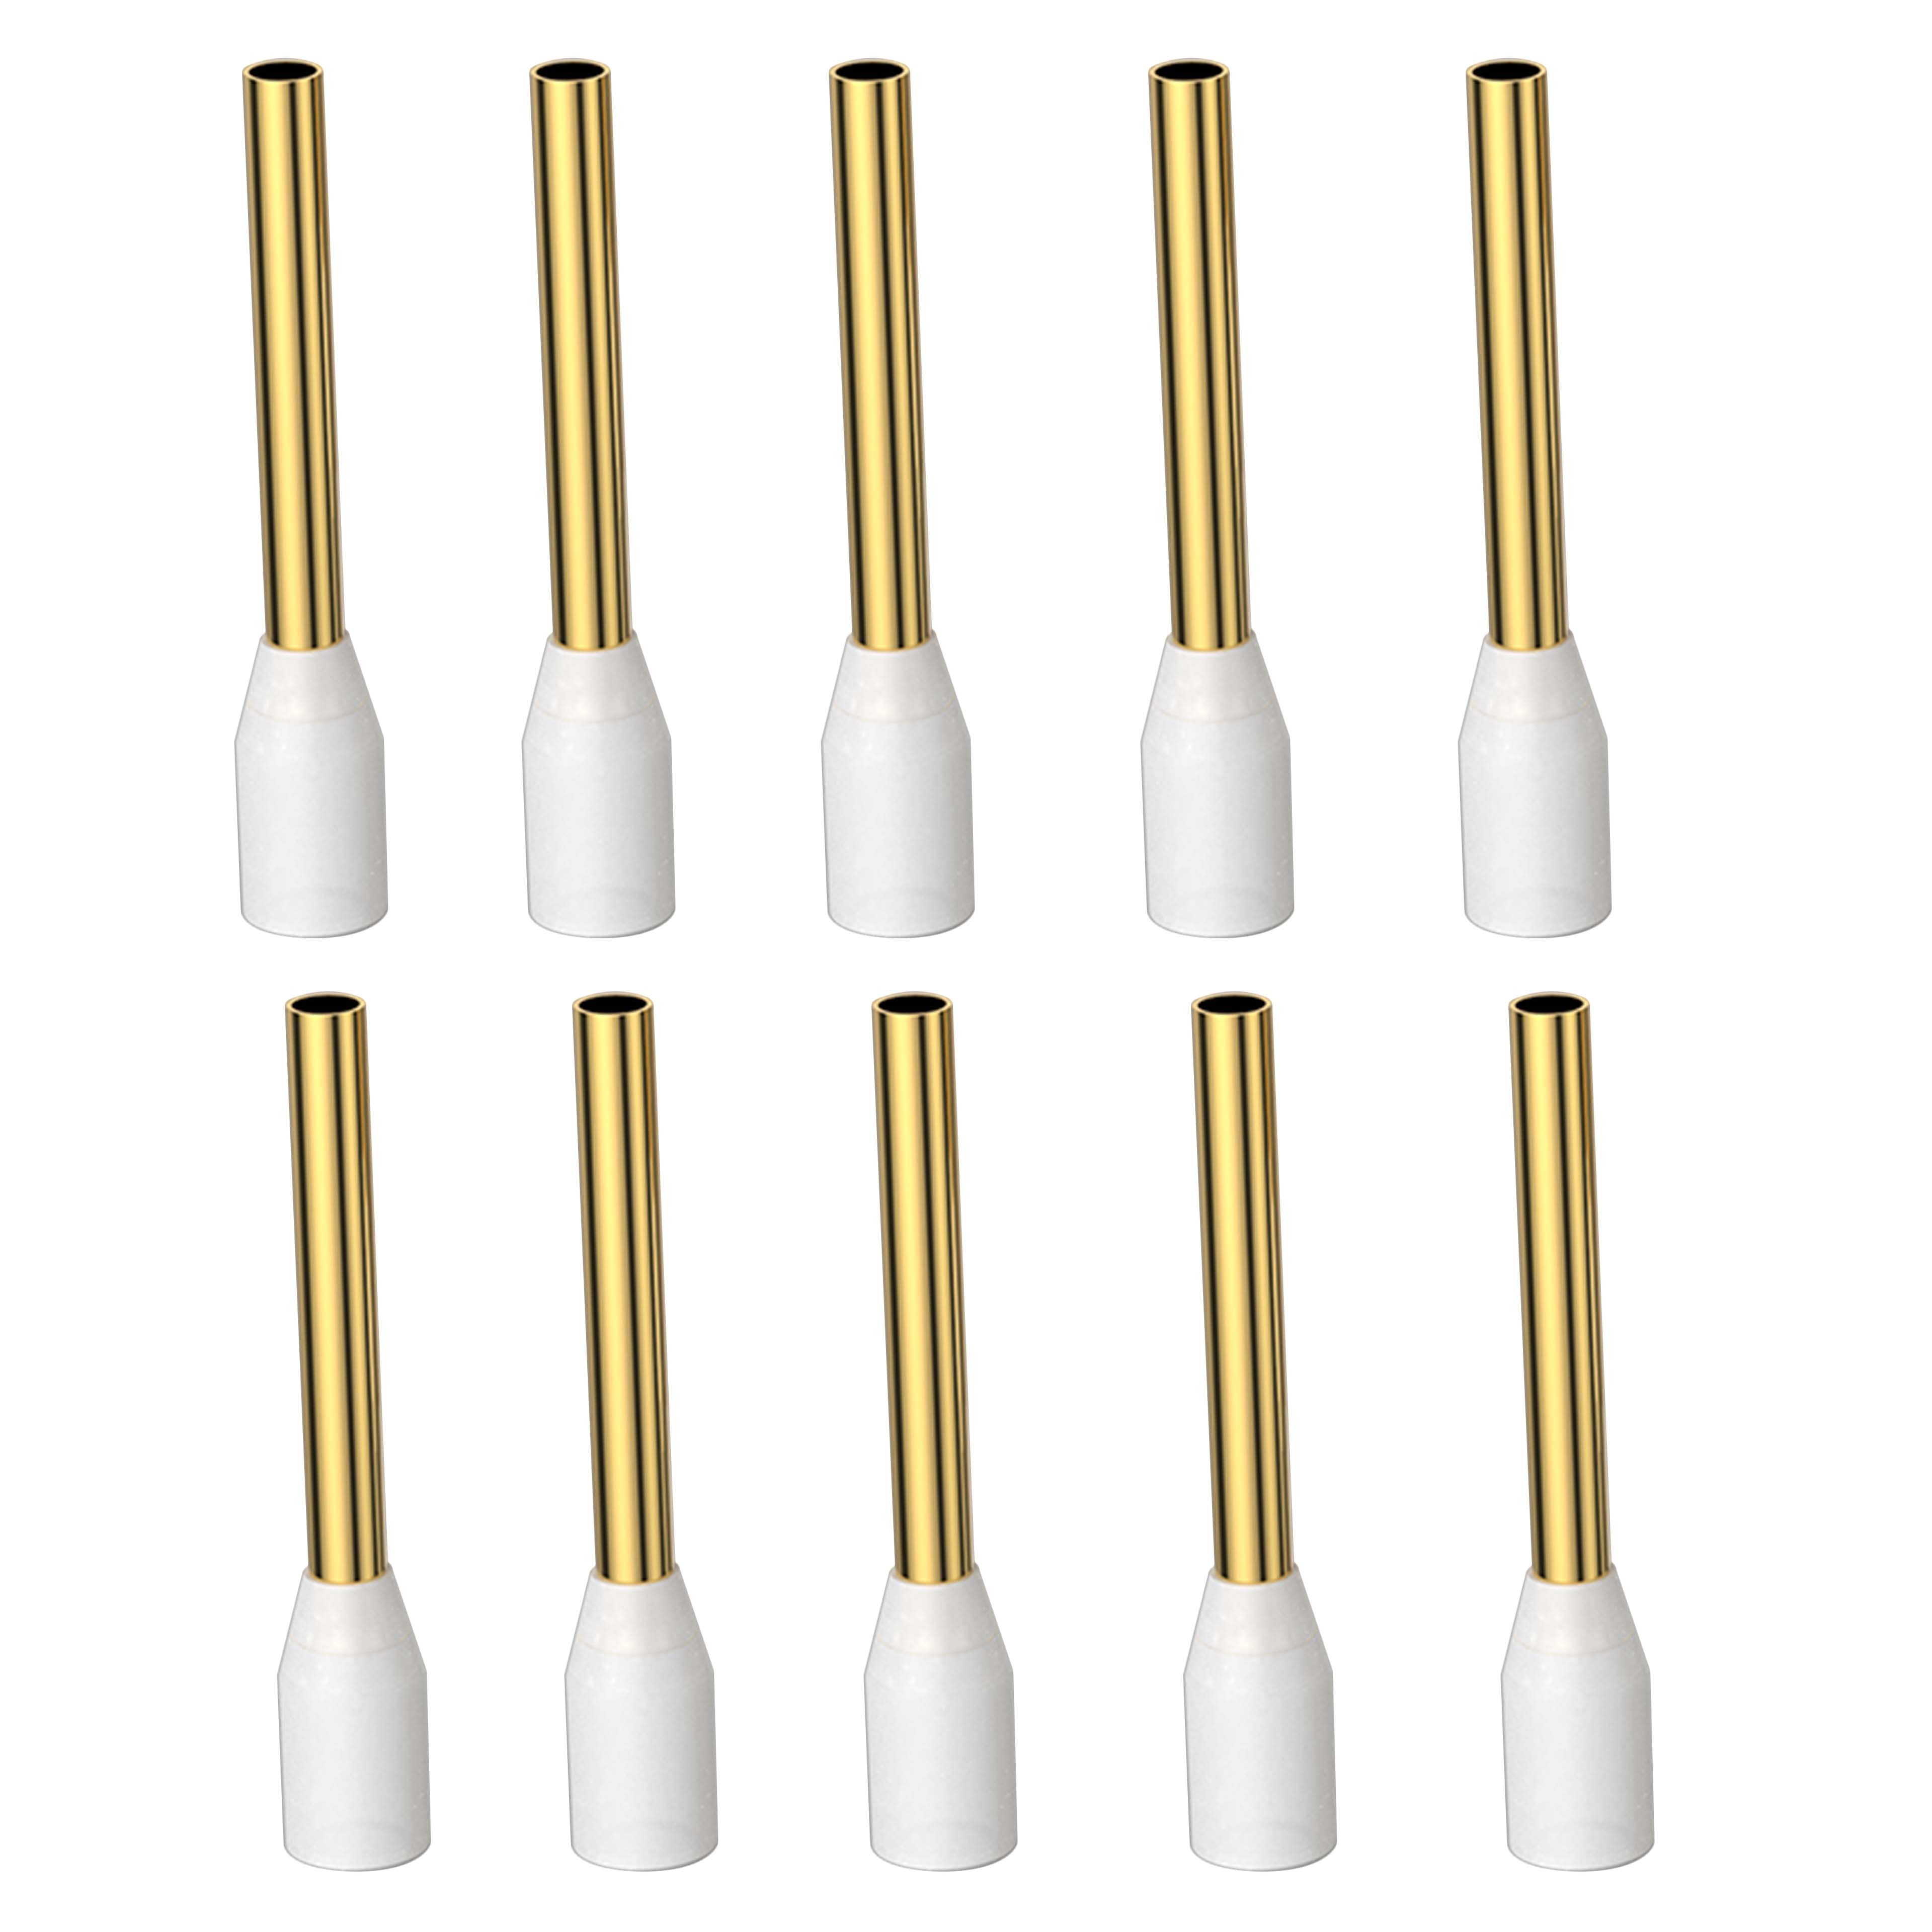 VIBORG VB4018G Cable Crimping Tips with Insulation 24k Gold-Plated Copper 4mm² (Set x10)